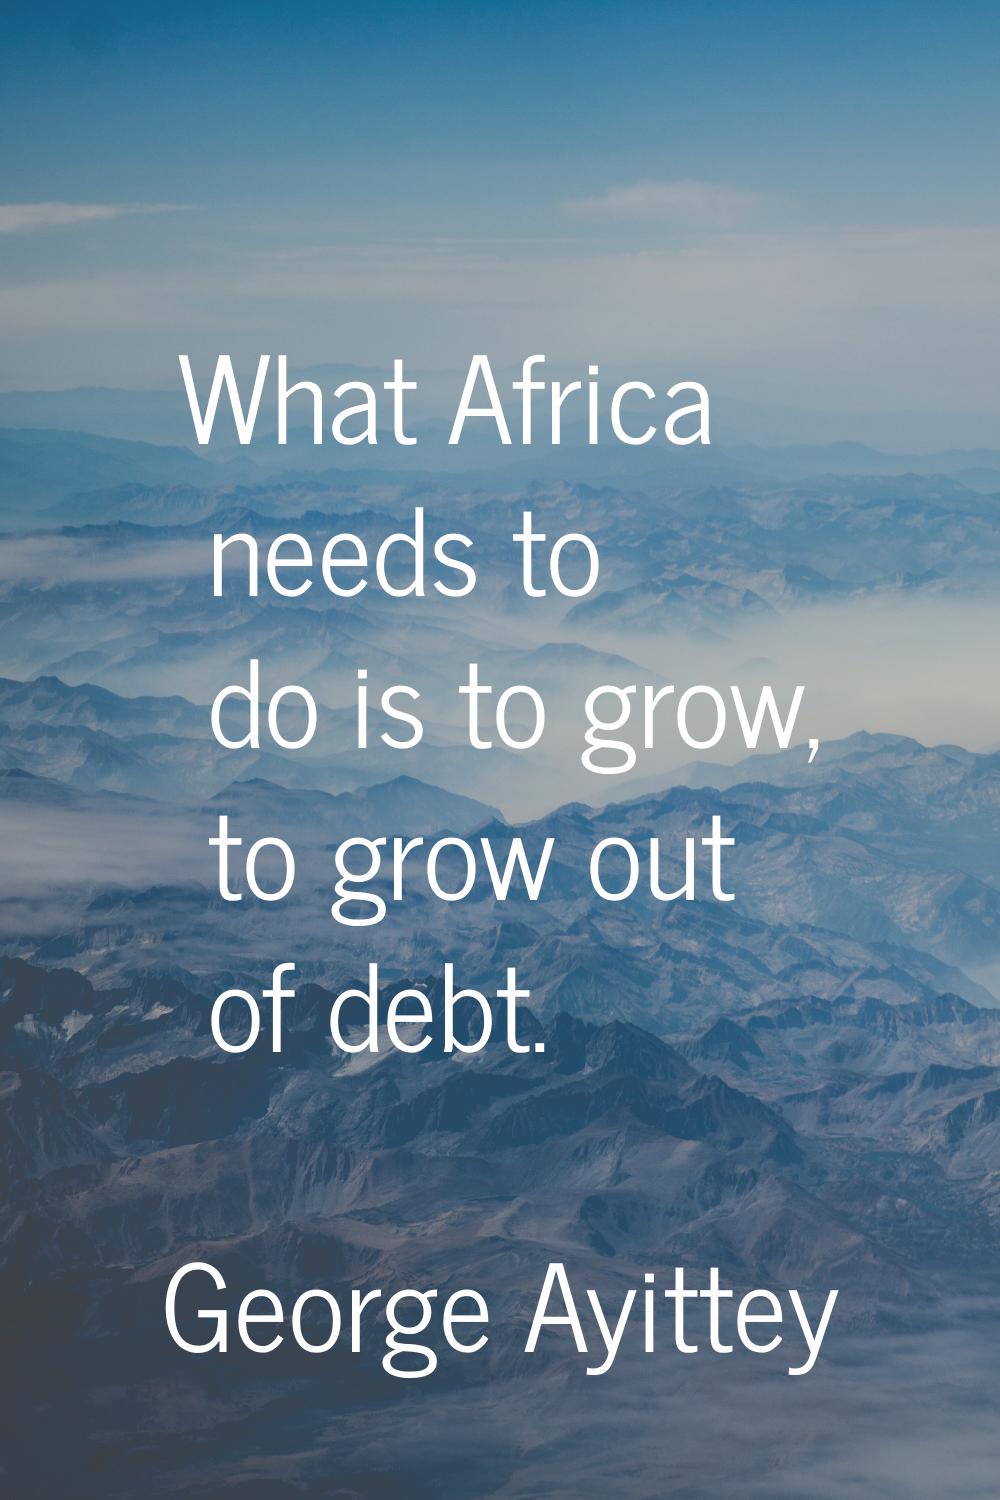 What Africa needs to do is to grow, to grow out of debt.